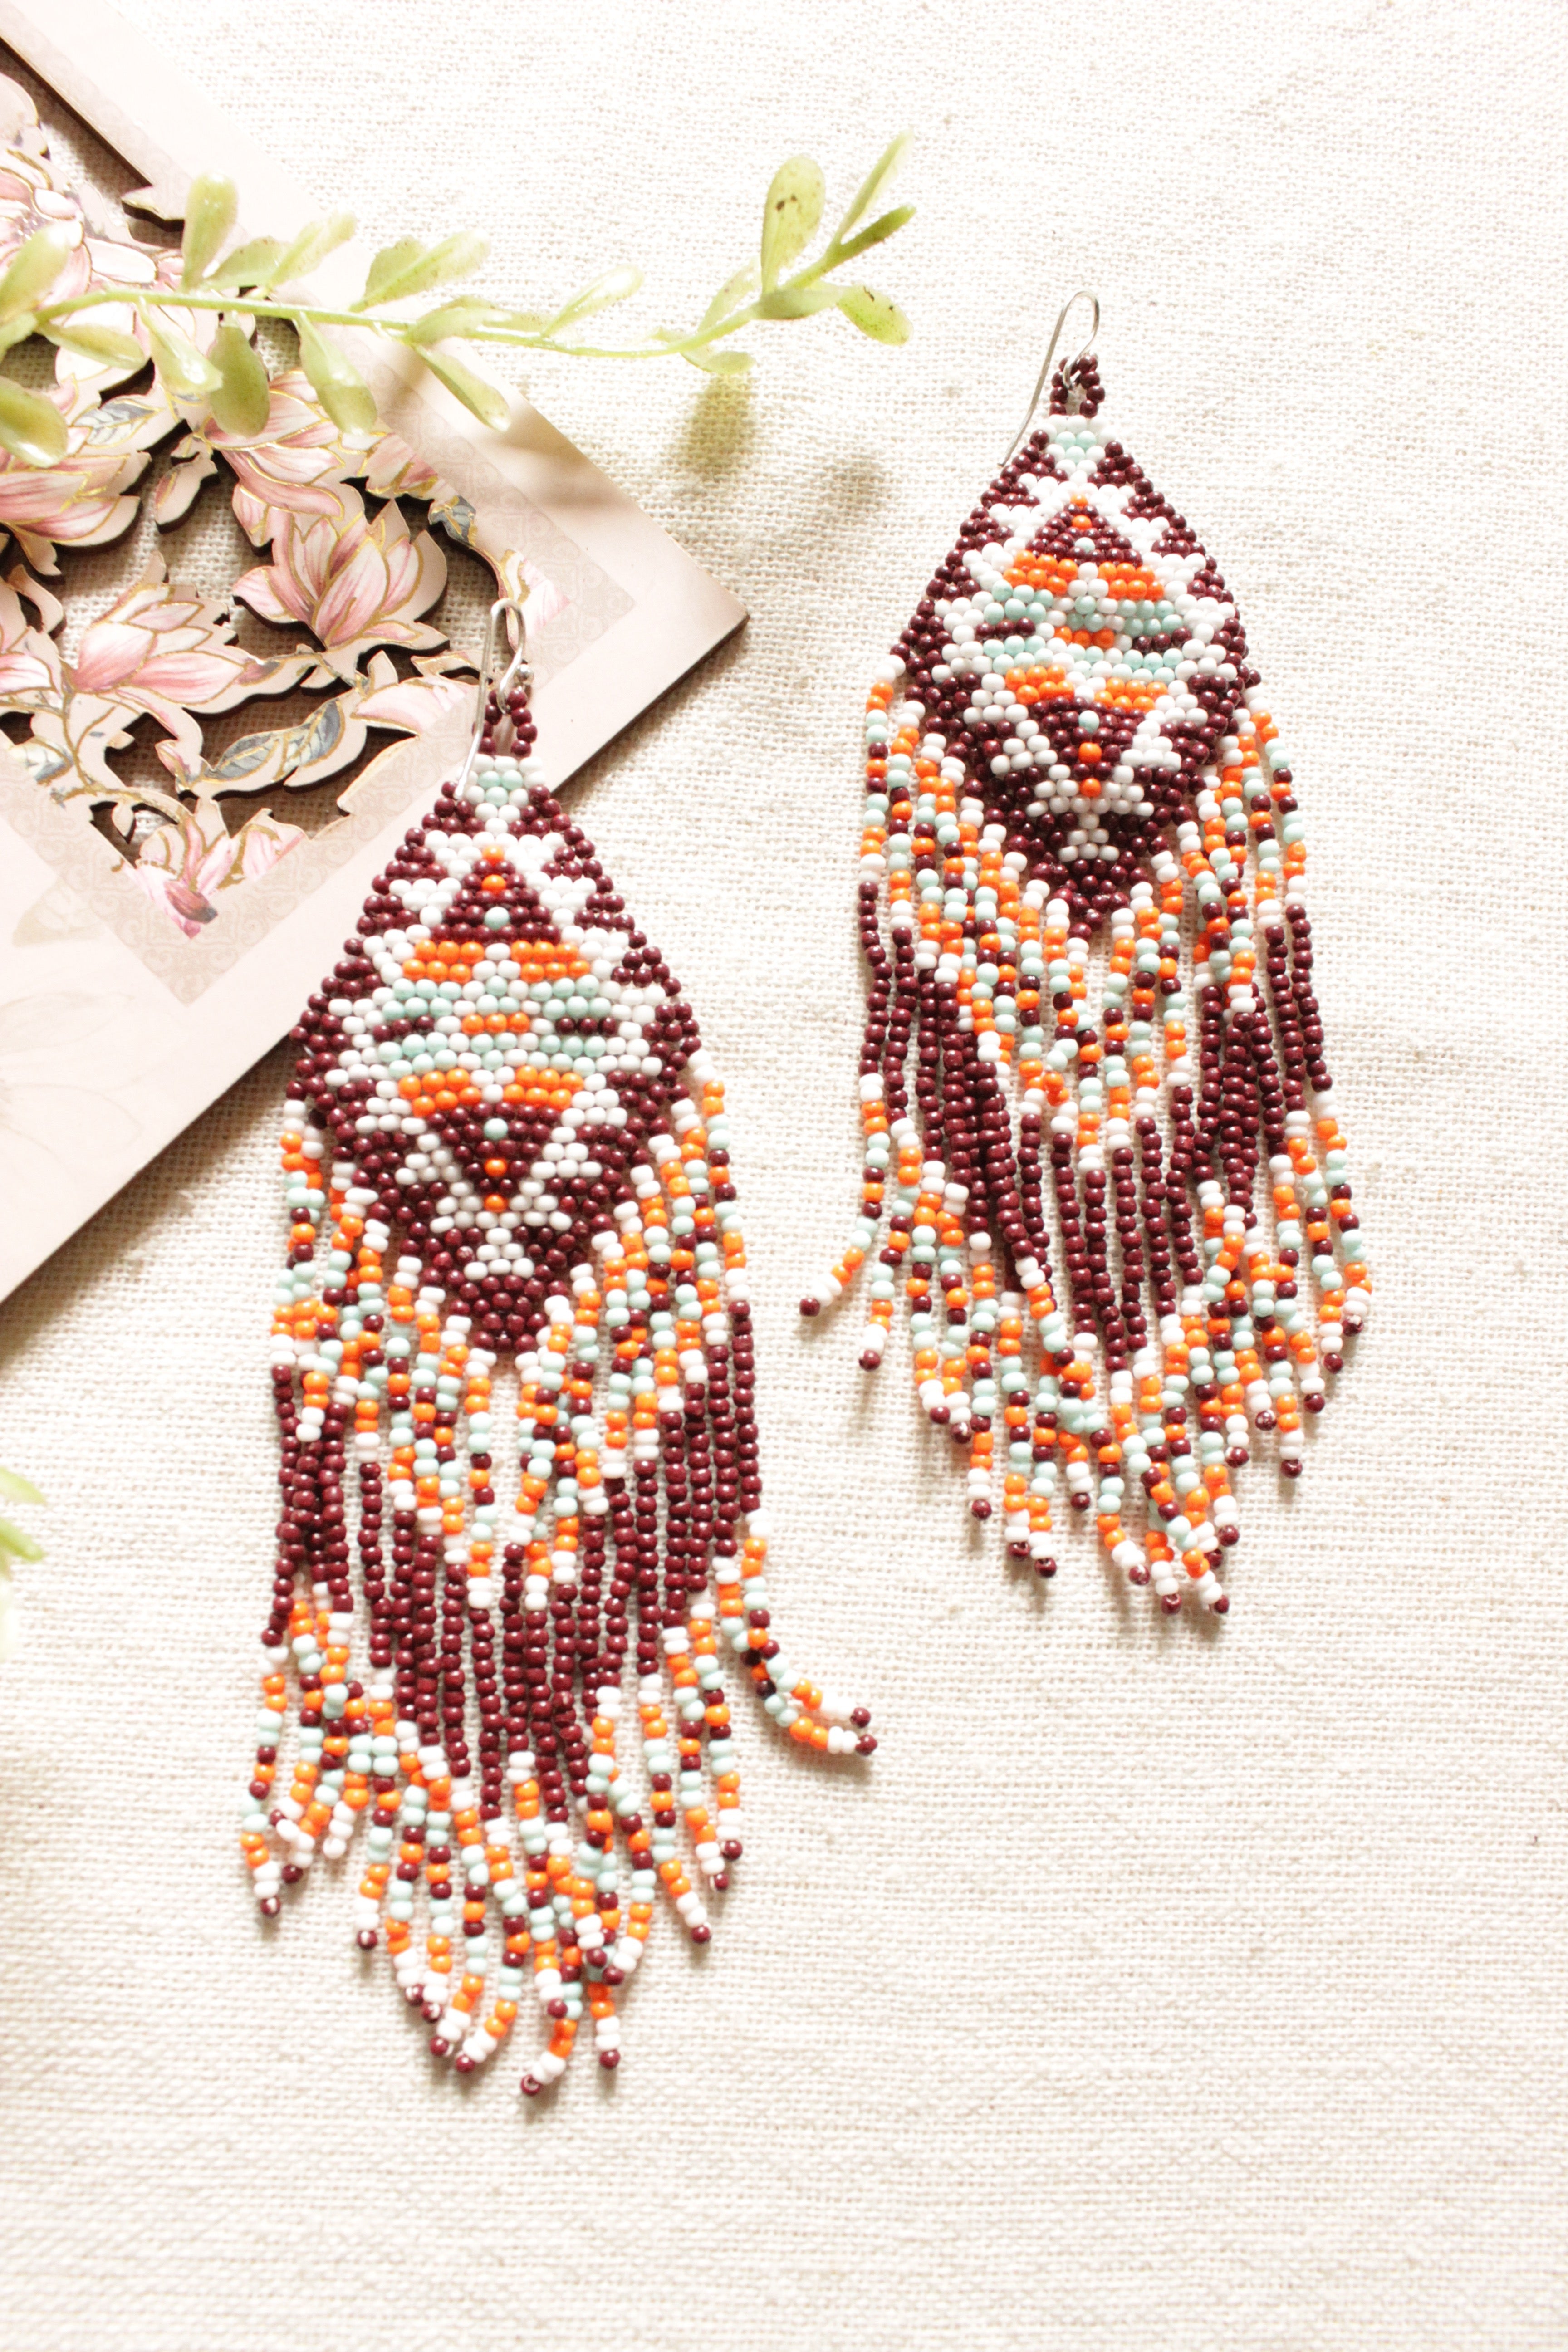 Brown and Multi-Color Beads Hand Braided Dangler Earrings